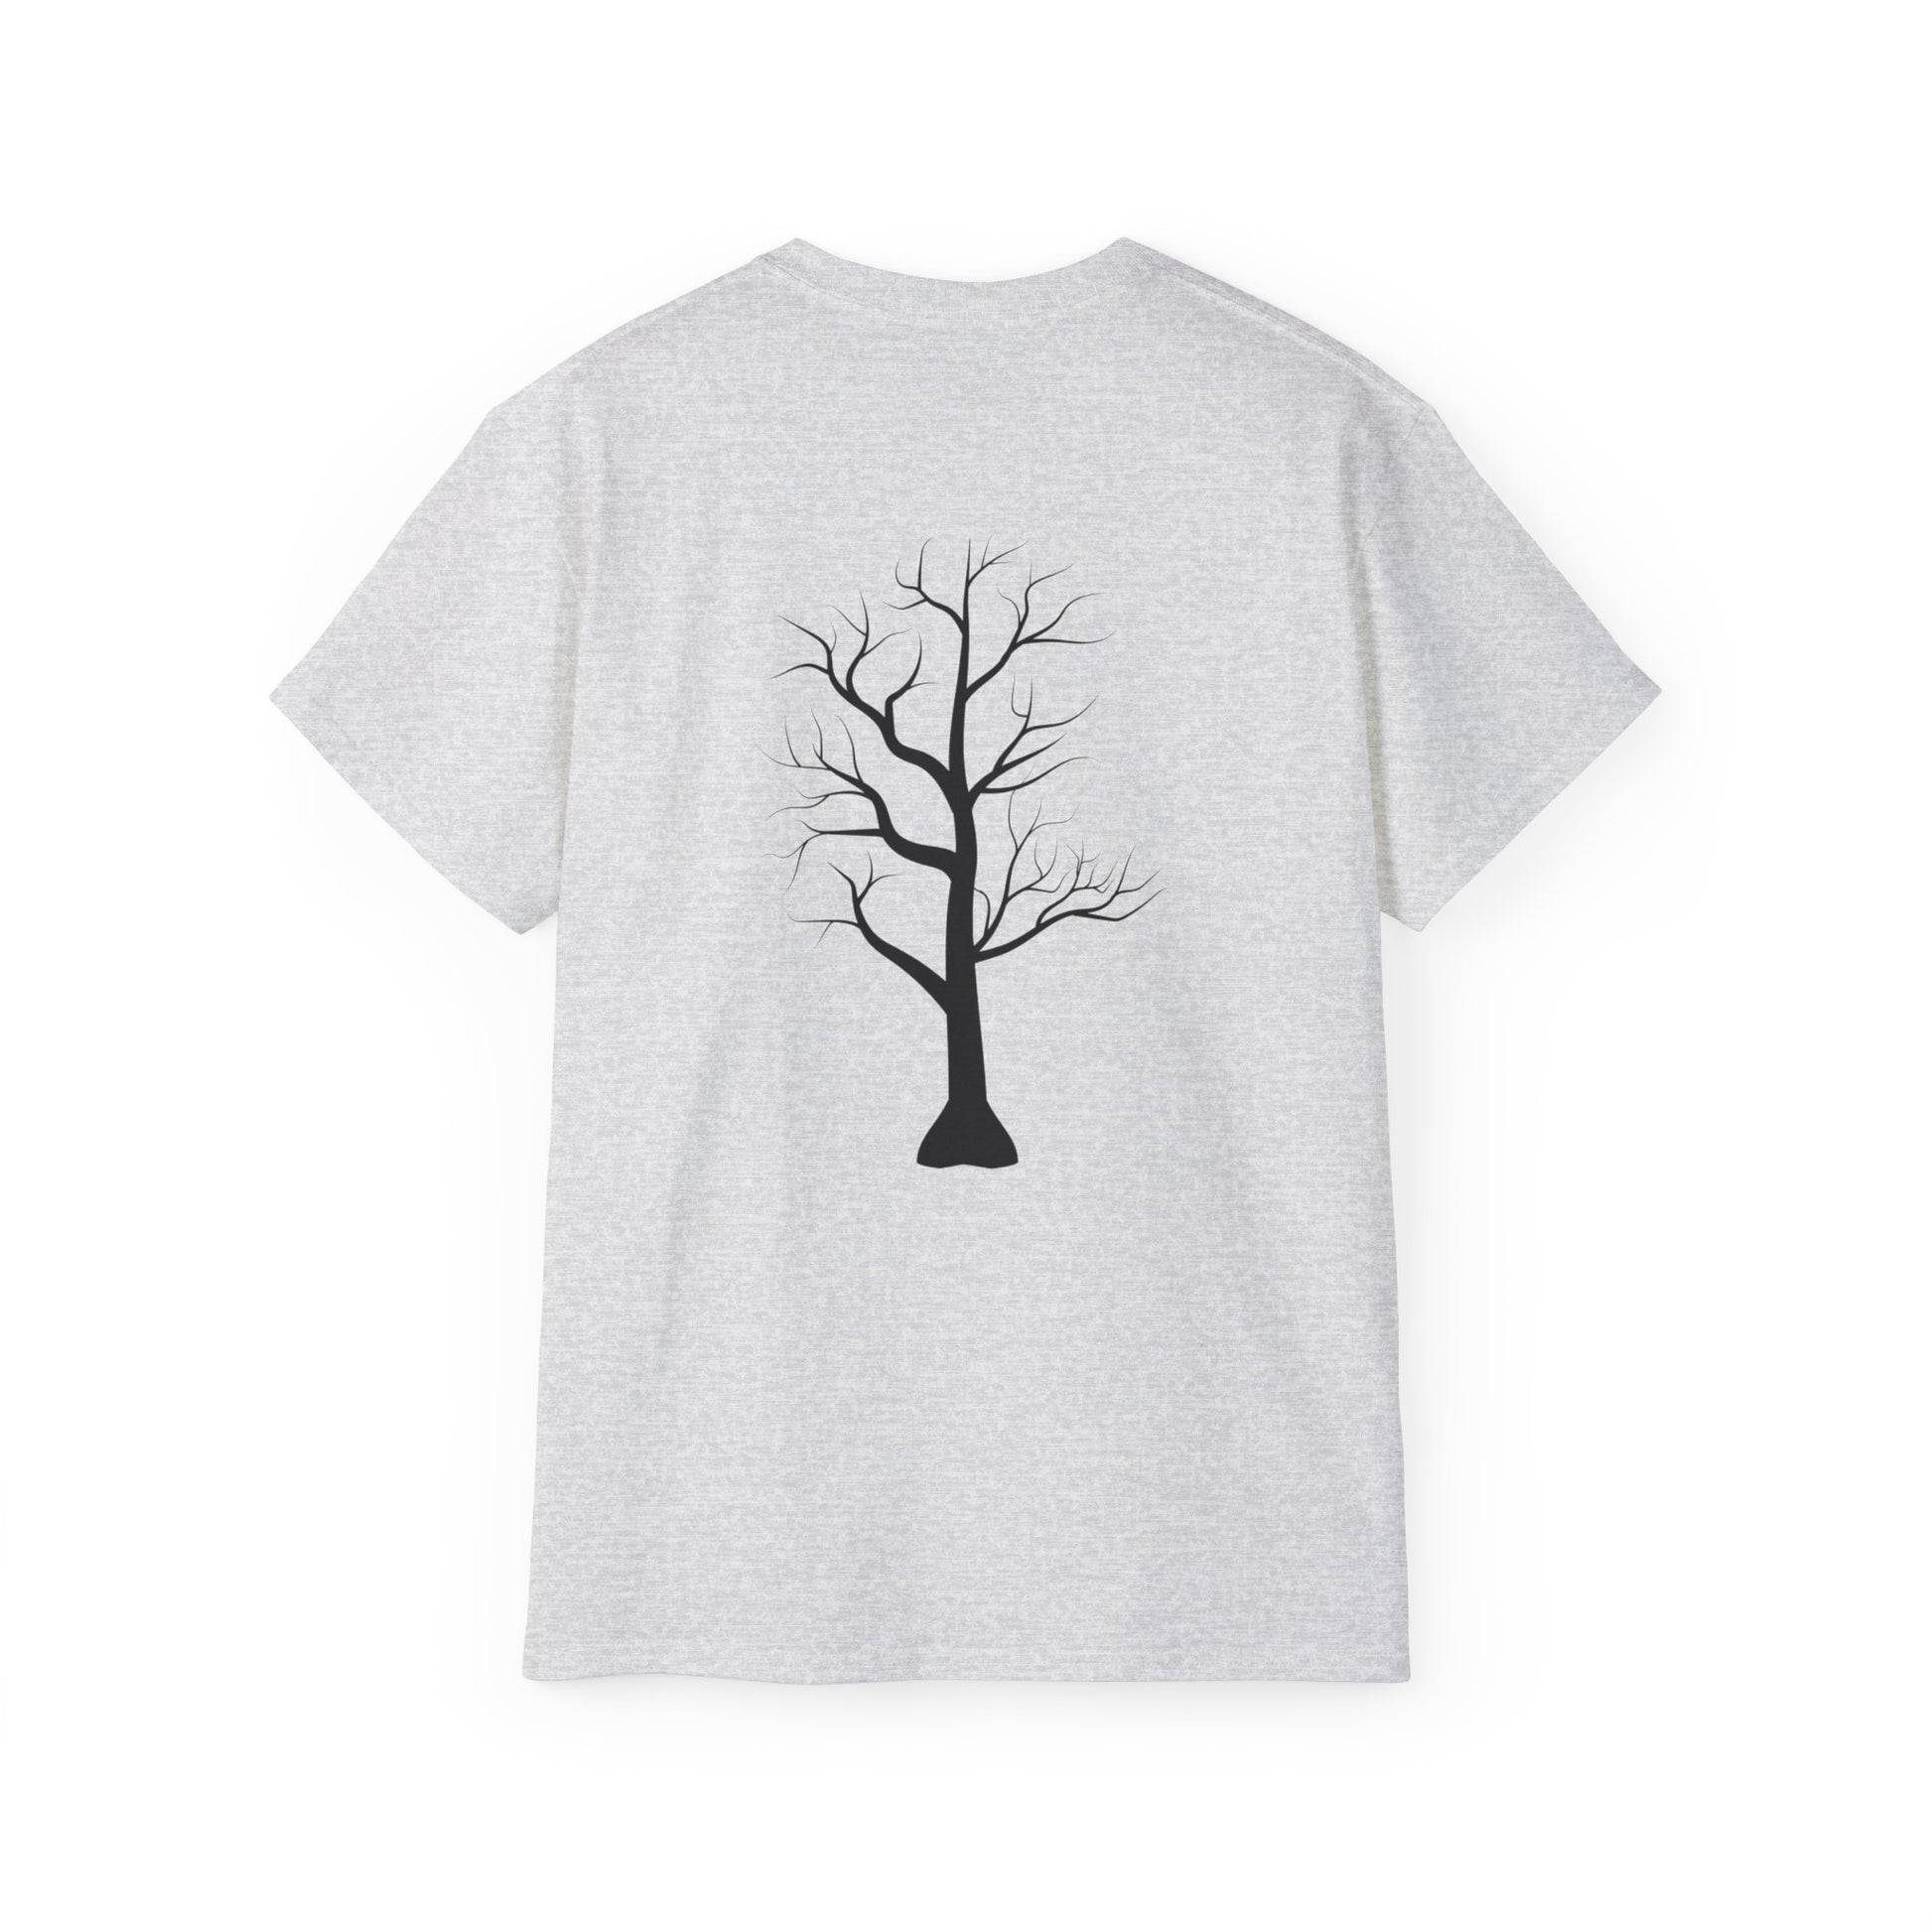 Rooted In Faith I Weather Every Storm Unisex Christian Ultra Cotton Tee Printify